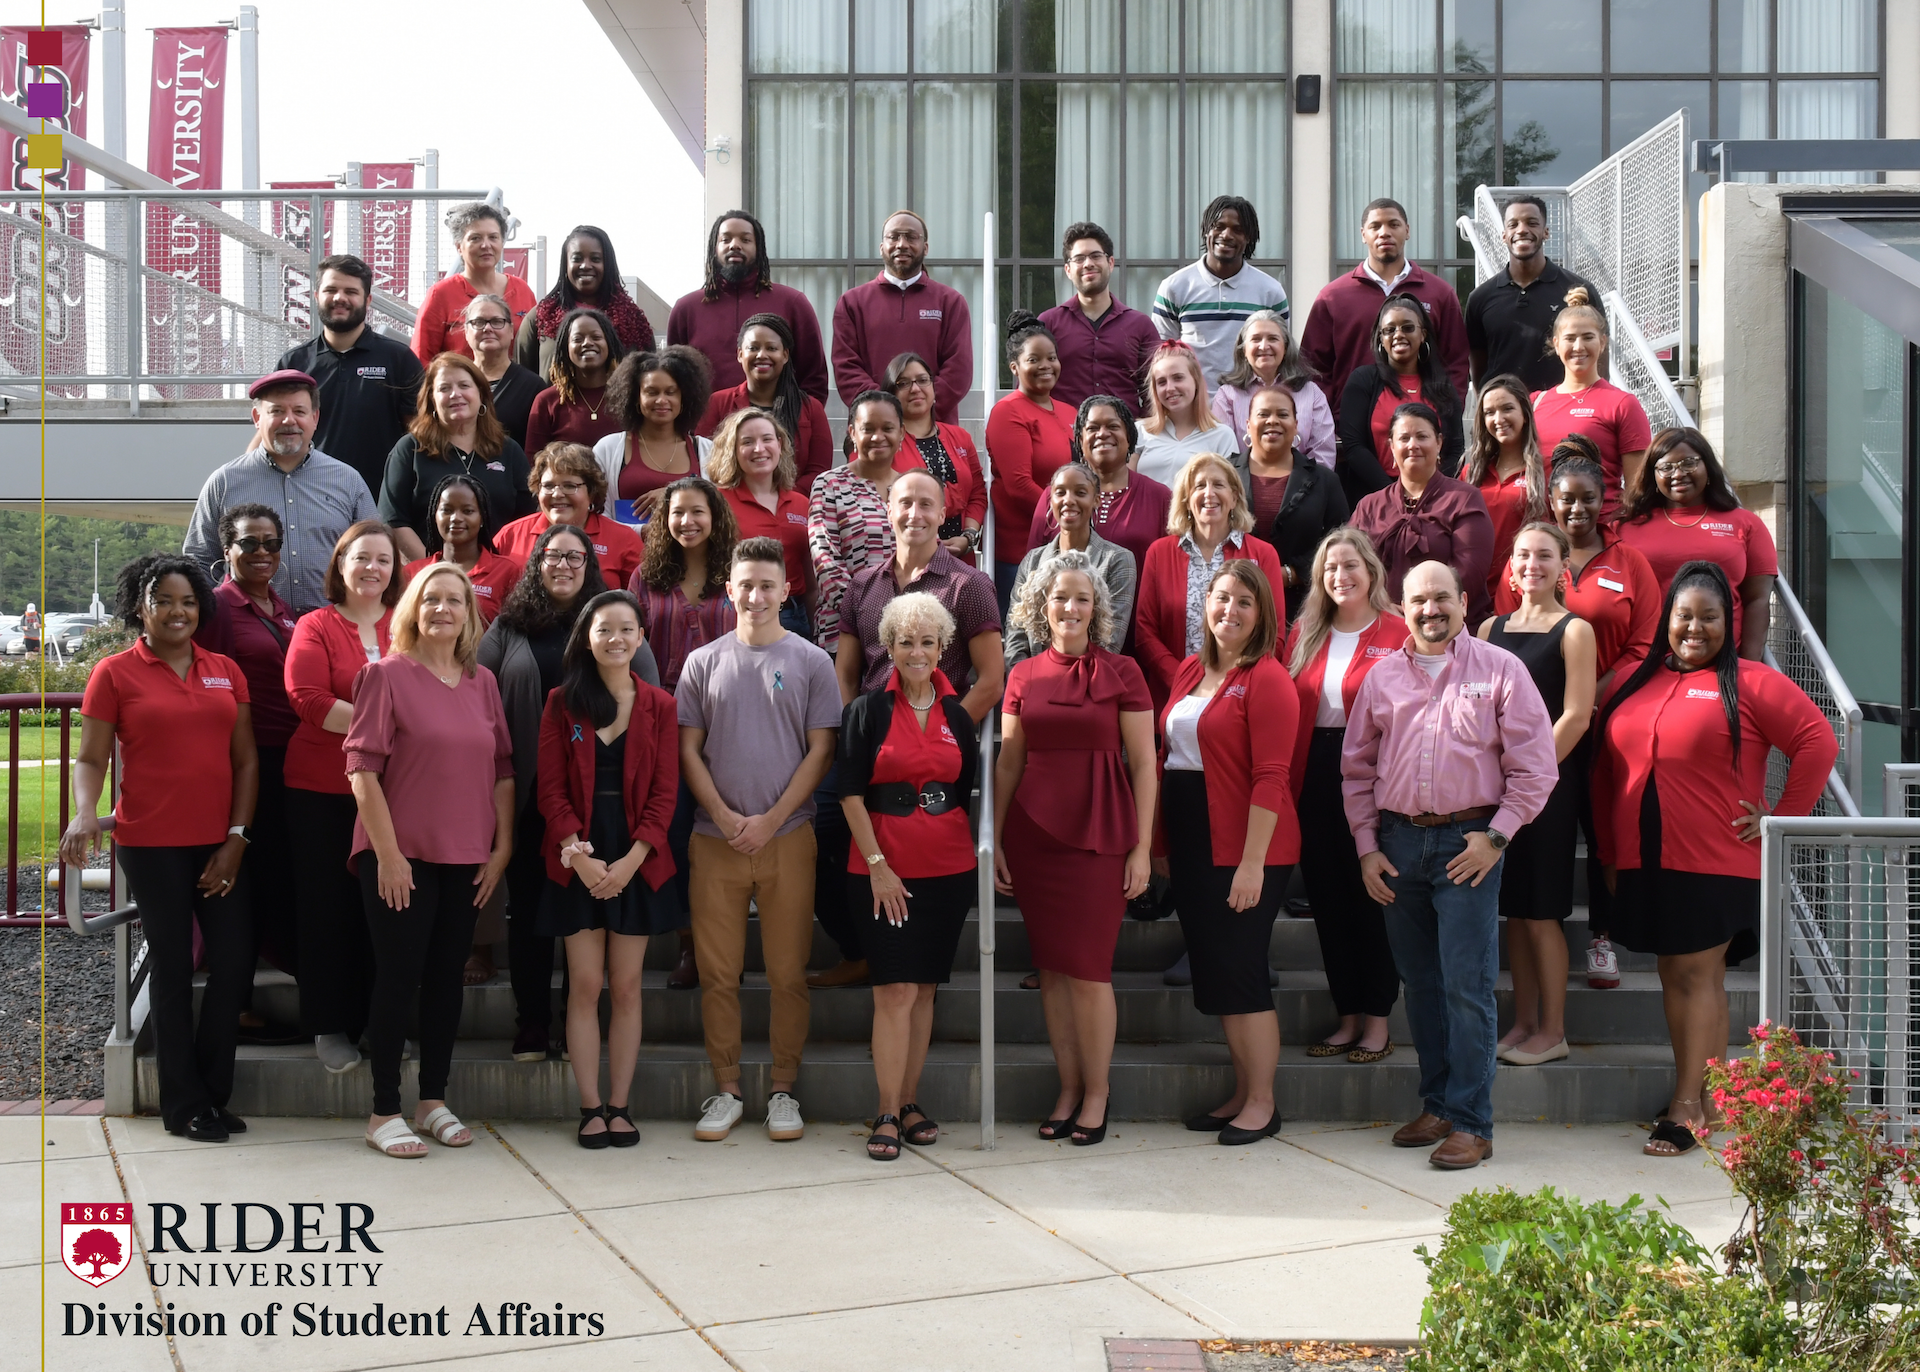 Rider University Division of Student Affairs group photo